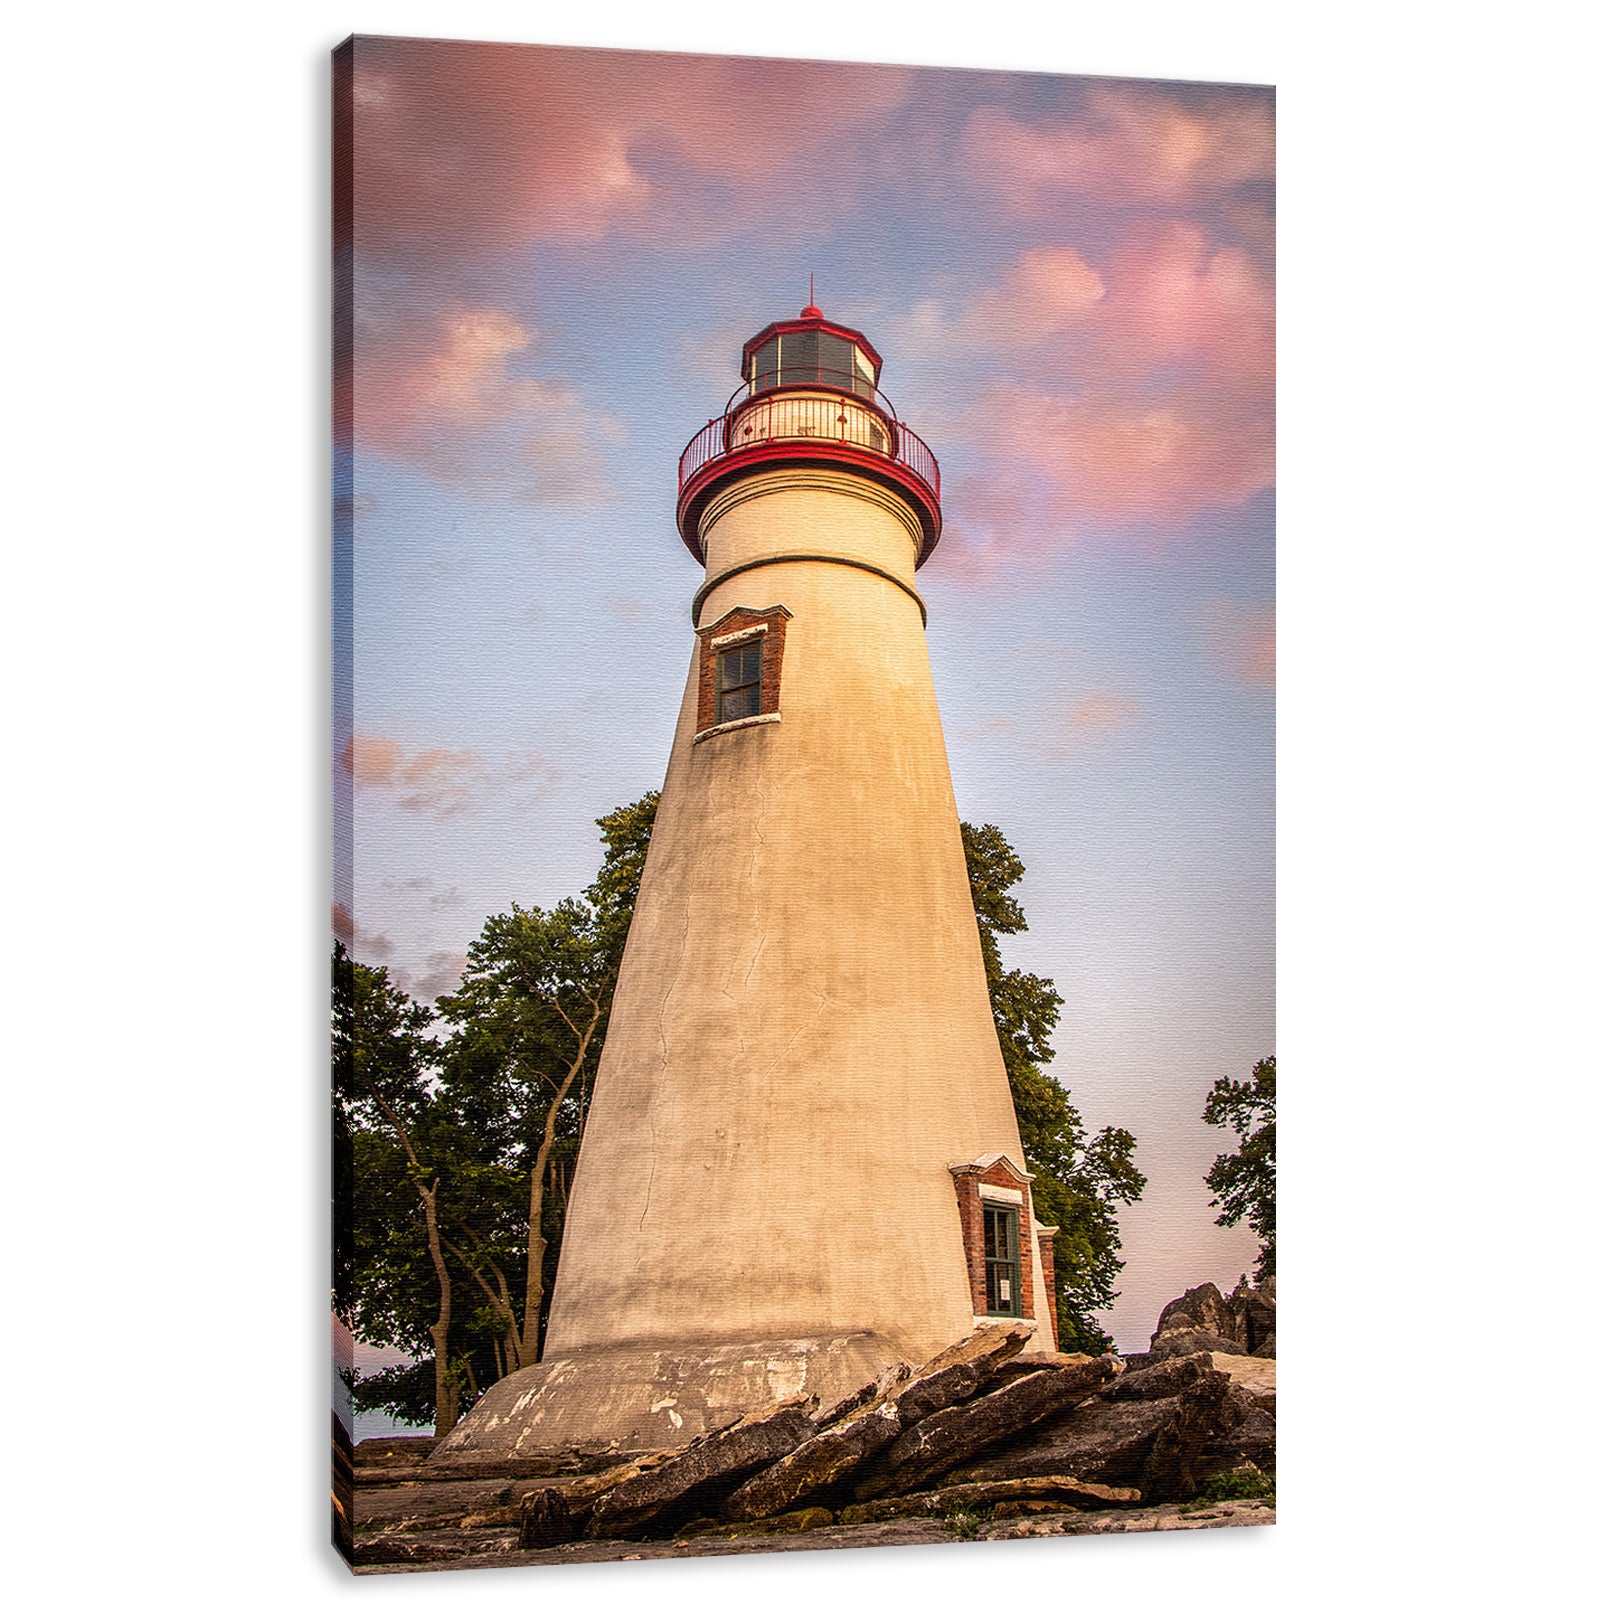 Marblehead Lighthouse at Sunset From the Shore Fine Art Canvas Wall Art Prints  - PIPAFINEART